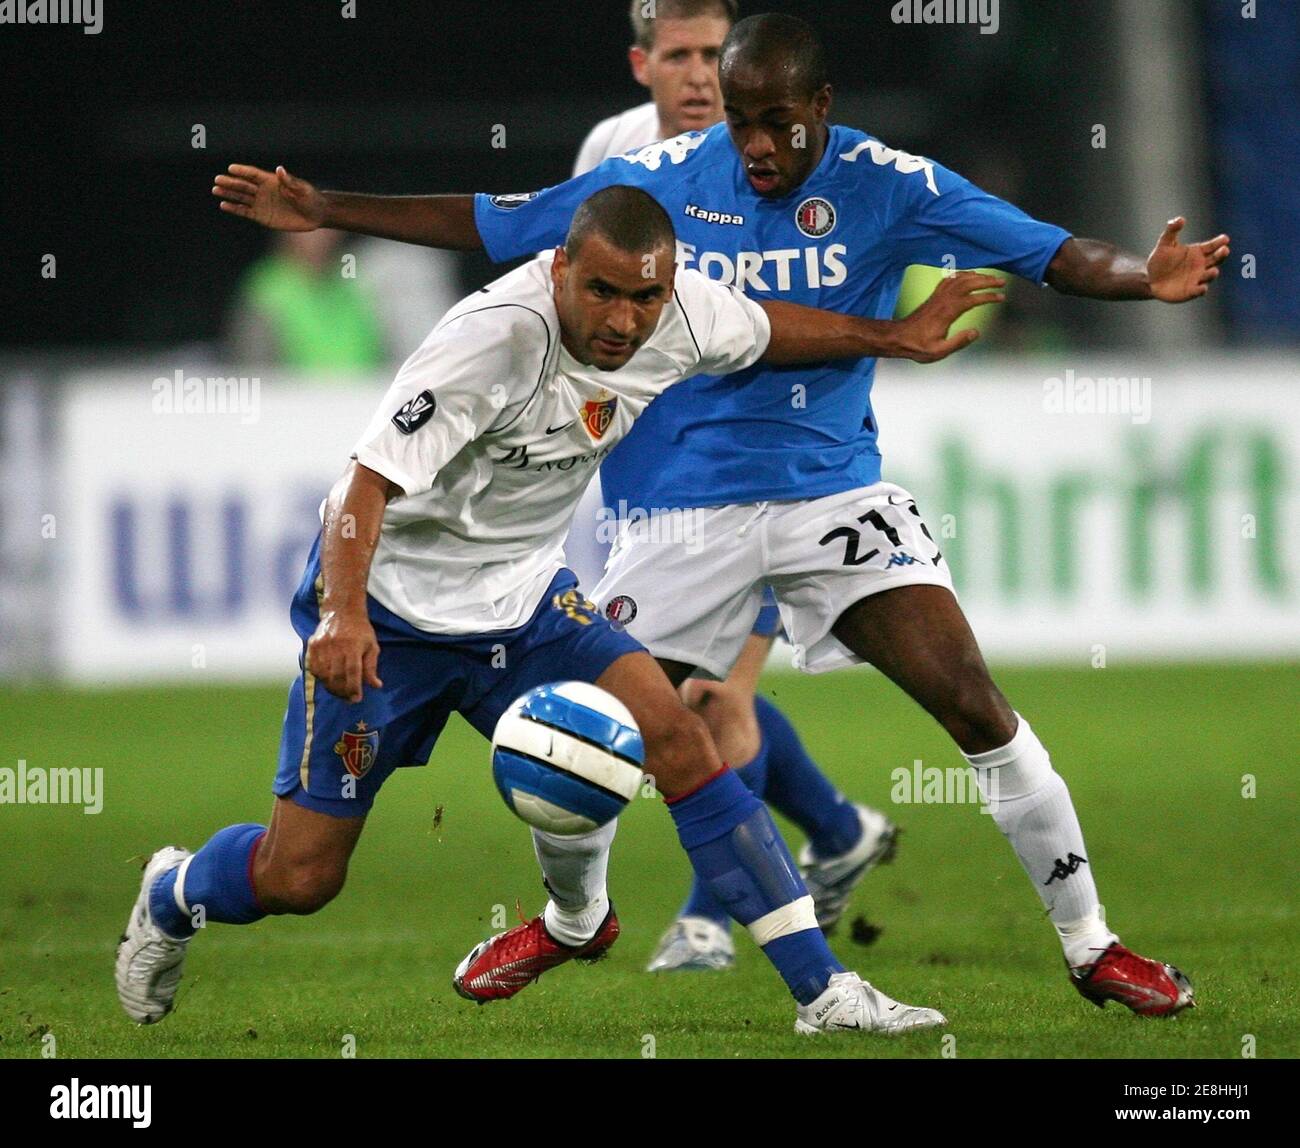 Basel's Delron Buckley (front) challenges Feyenoord Rotterdam's Dwight Tiendalli during their UEFA Cup Group E soccer match in Basel October 19, 2006. REUTERS/Pascal Lauener (SWITZERLAND) Stock Photo